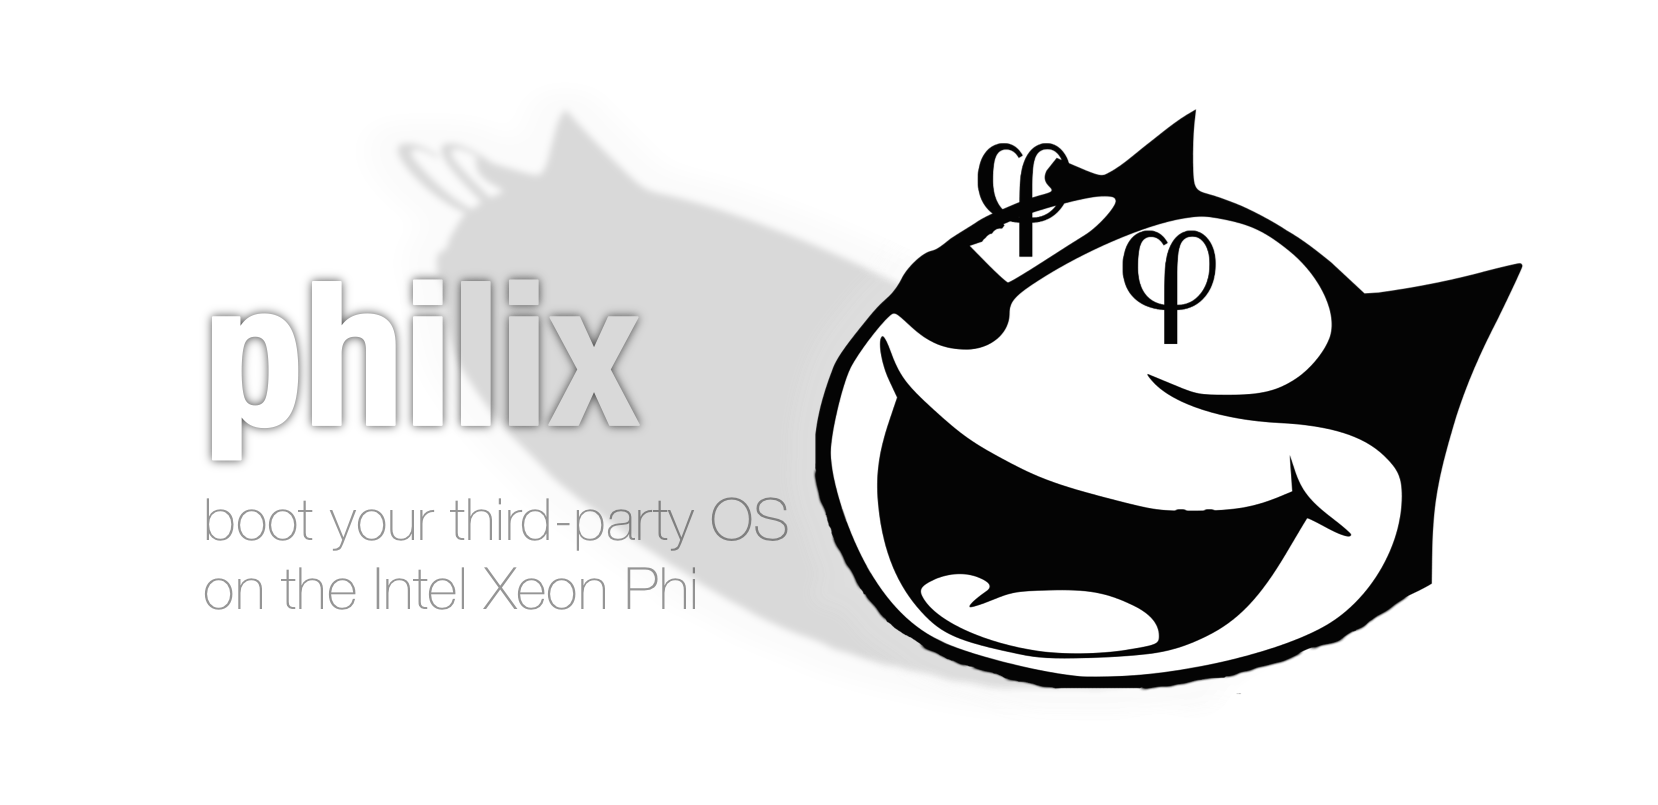 Boot your third-party OS on the Intel Xeon Phi